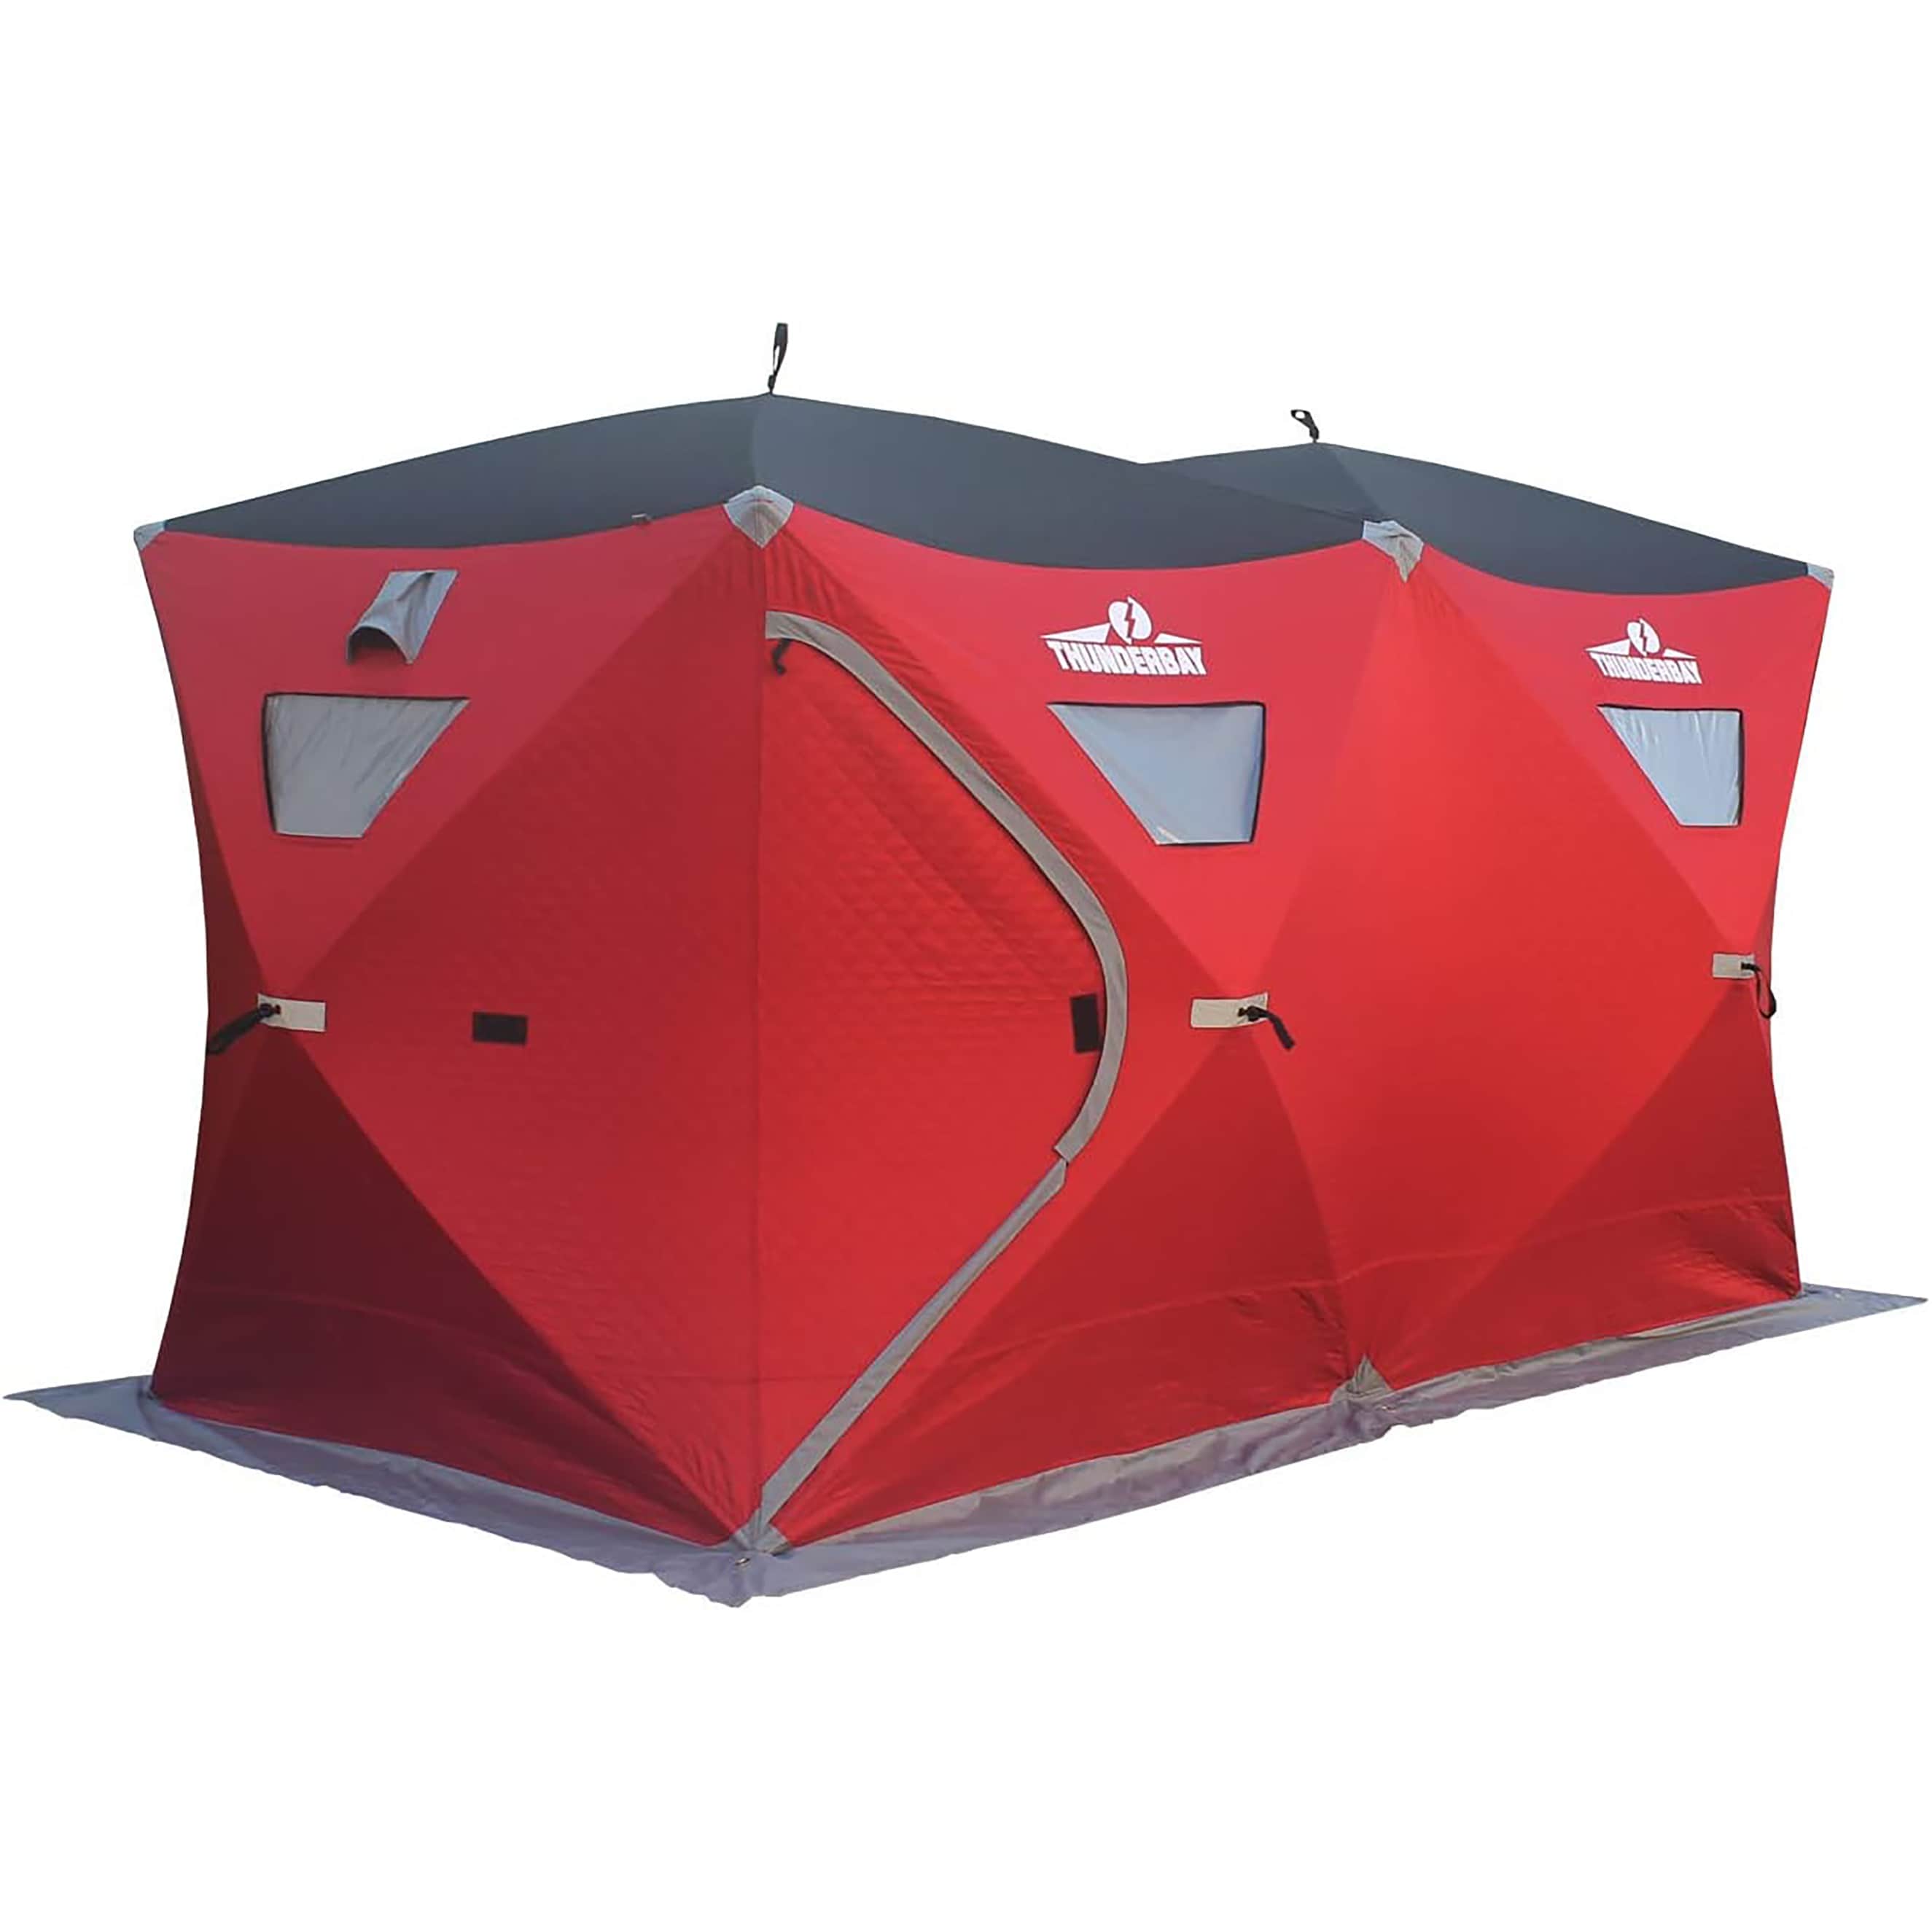 Outsunny 2 Person Insulated Ice Fishing Shelter Pop-Up Portable Ice Fishing  Tent with Carry Bag and Anchors for -22℉, Red